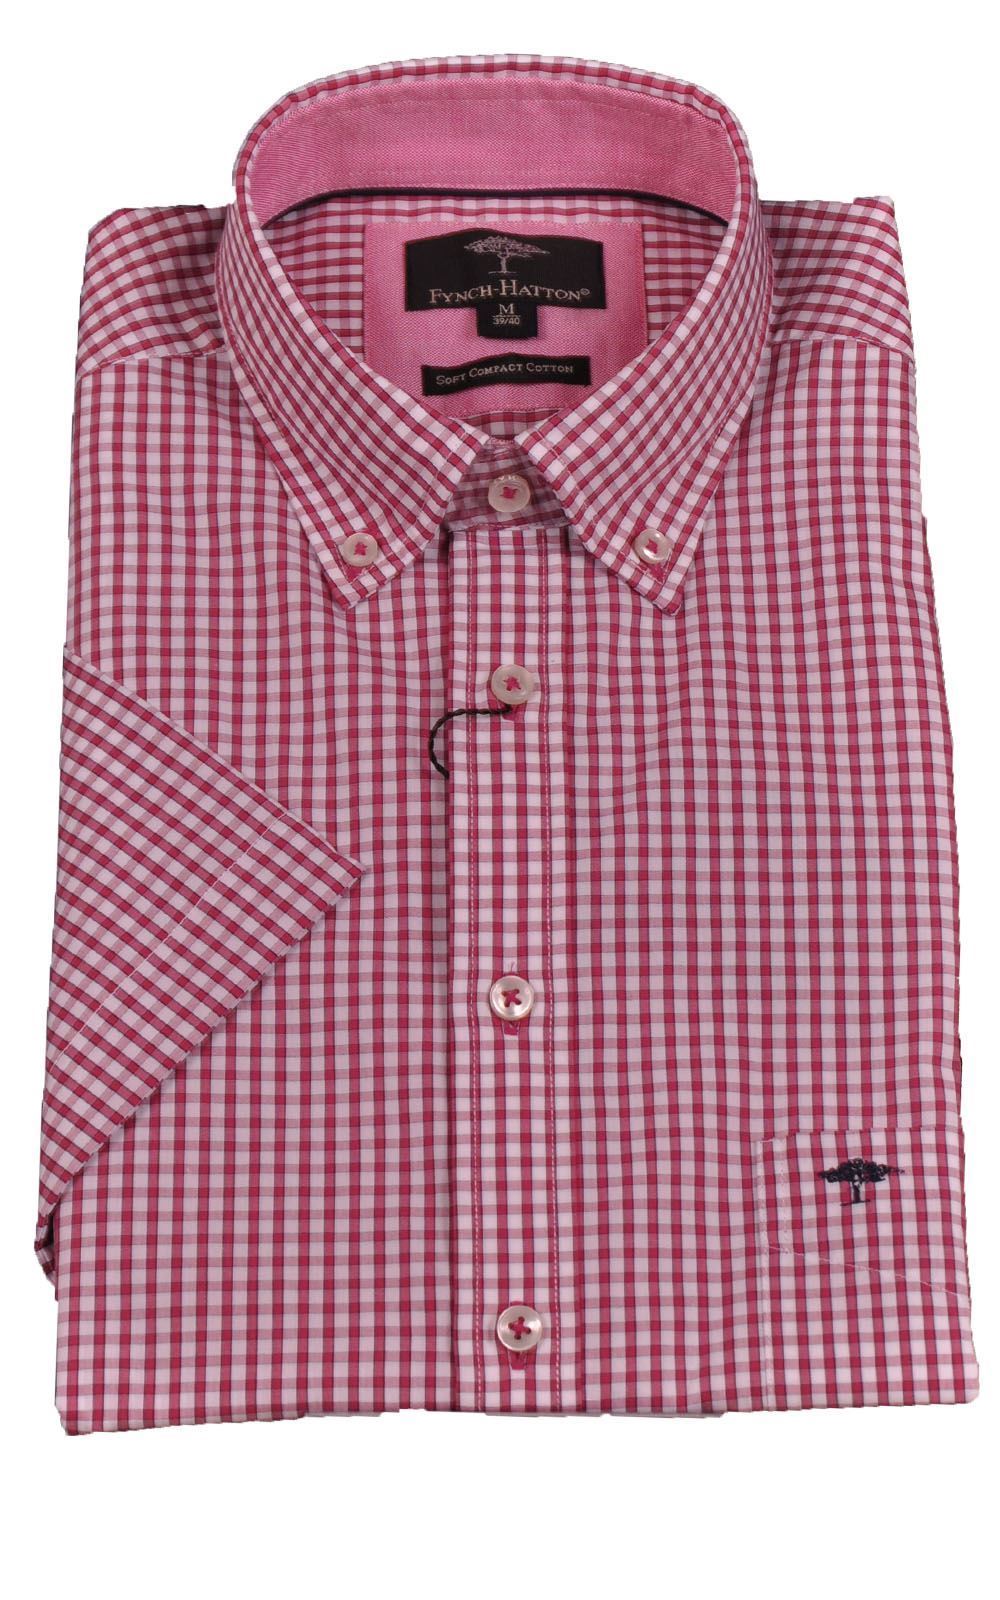 Picture of Fynch Hatton Short Sleeve Shirt 1120-5021